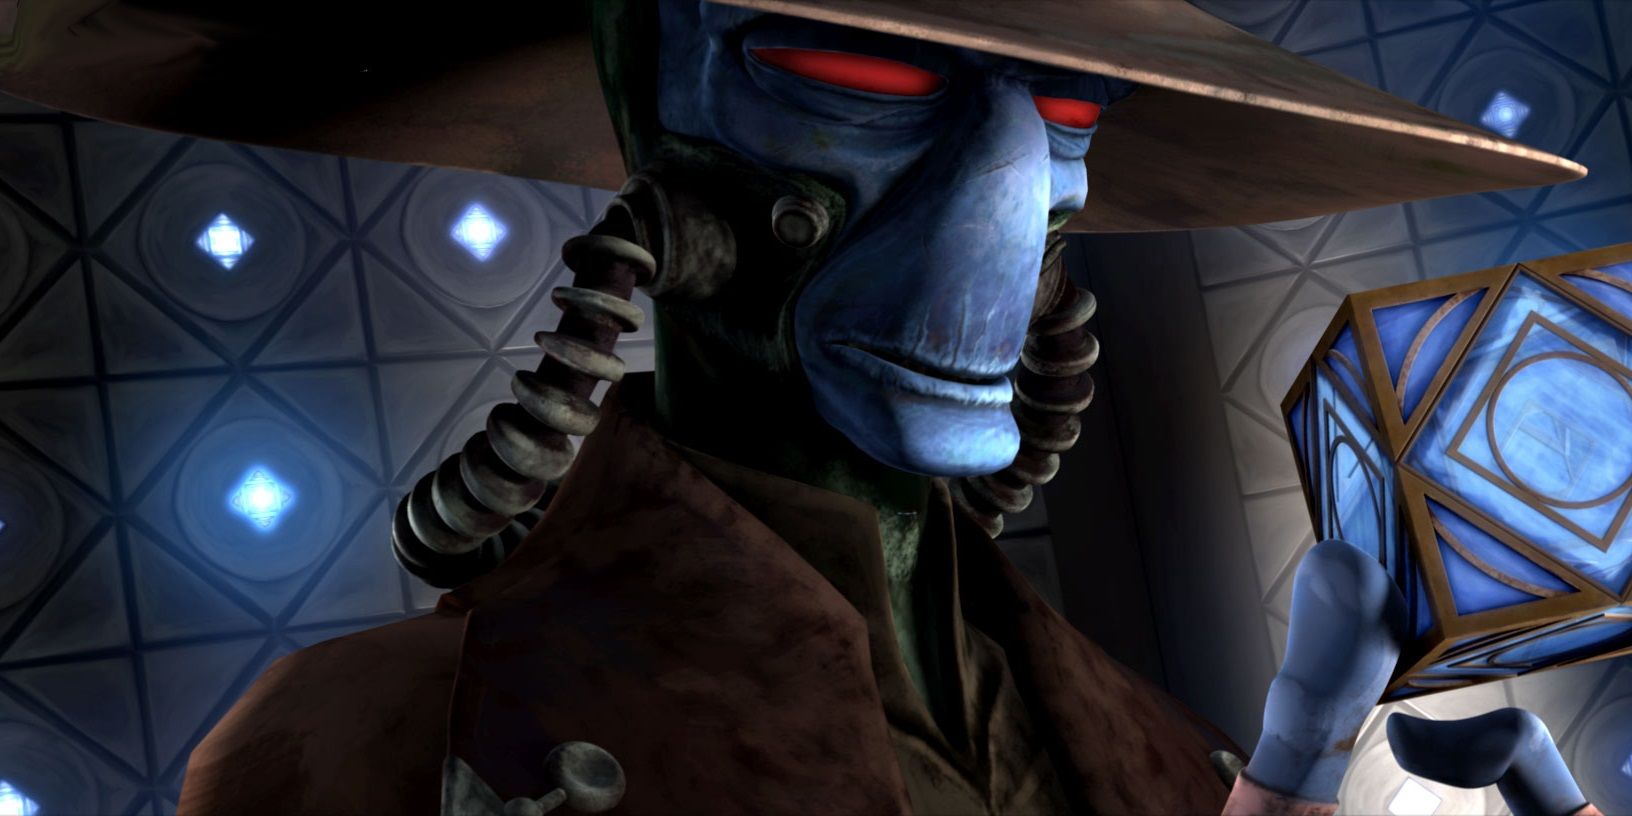 Cad Bane steals a Jedi holocron from the Jedi temple in Star Wars The Clone Wars